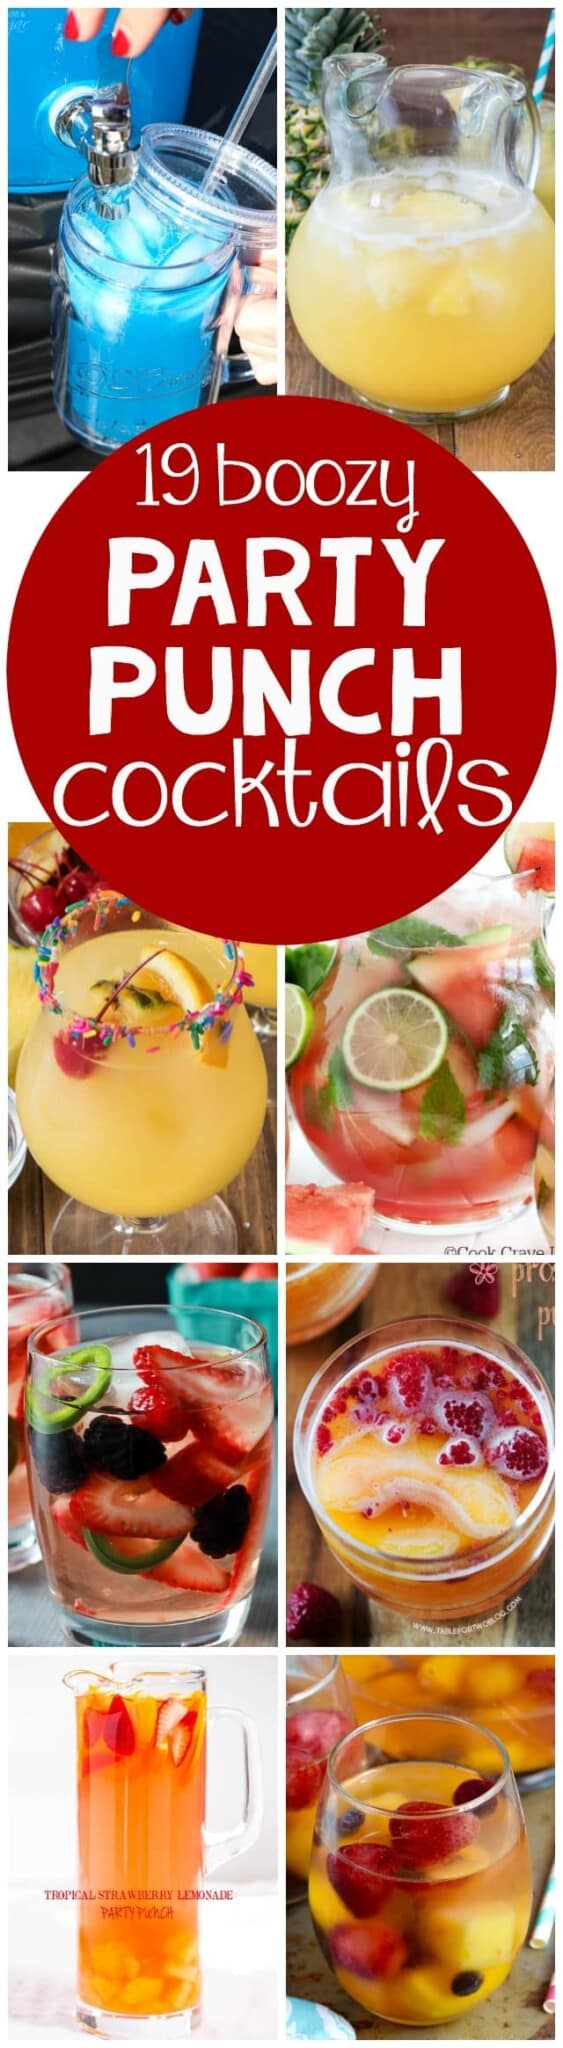 33 Best Party Punch Recipes